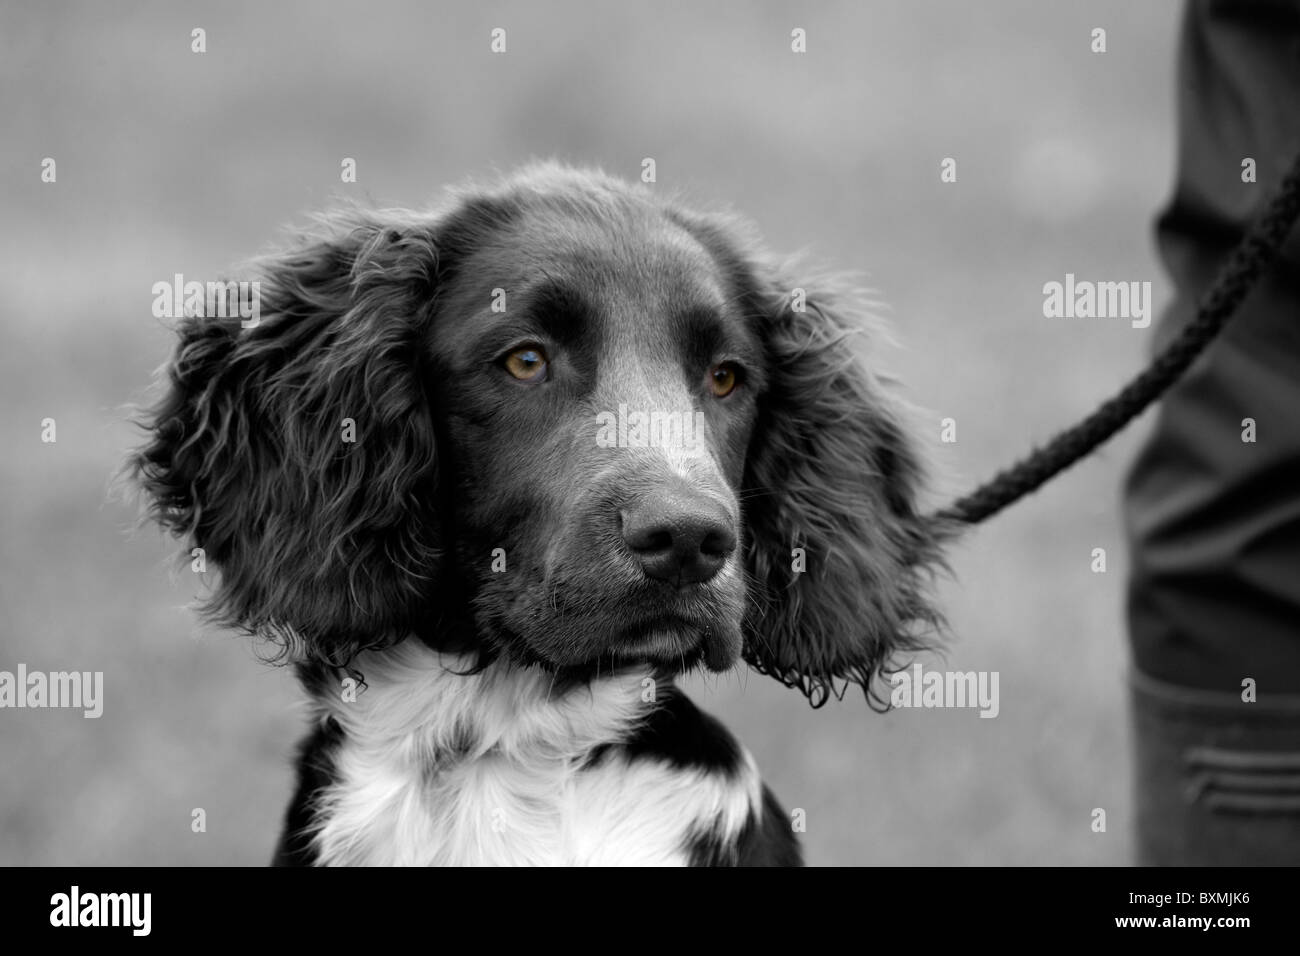 Springer Spaniel on a shoot day in black and white Stock Photo